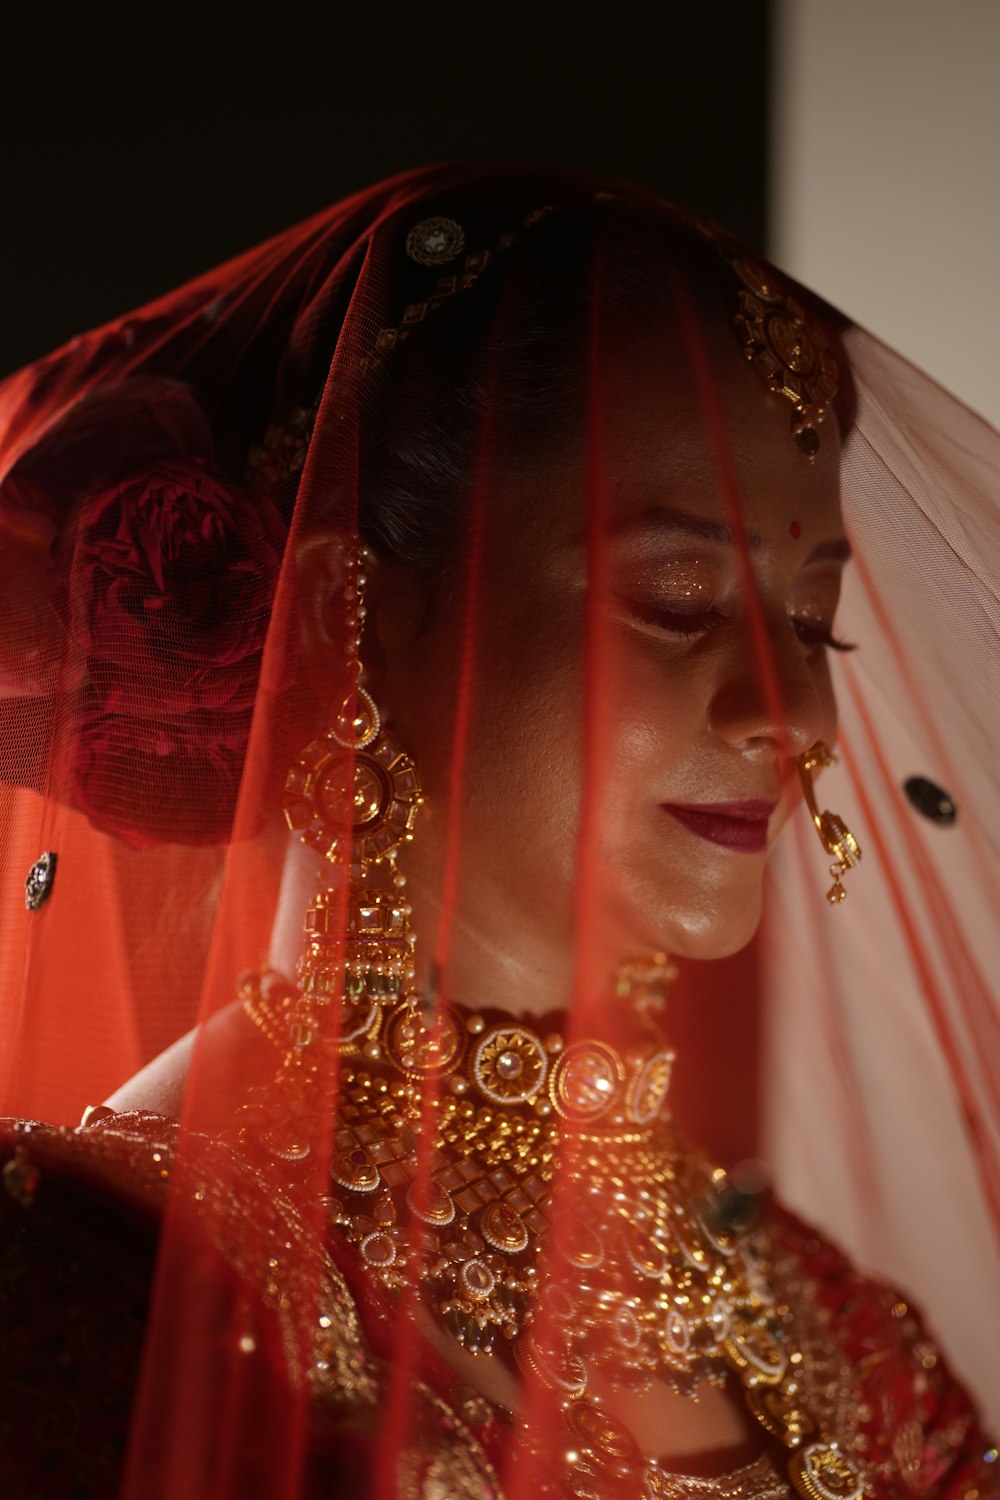 a woman wearing a veil and a red dress